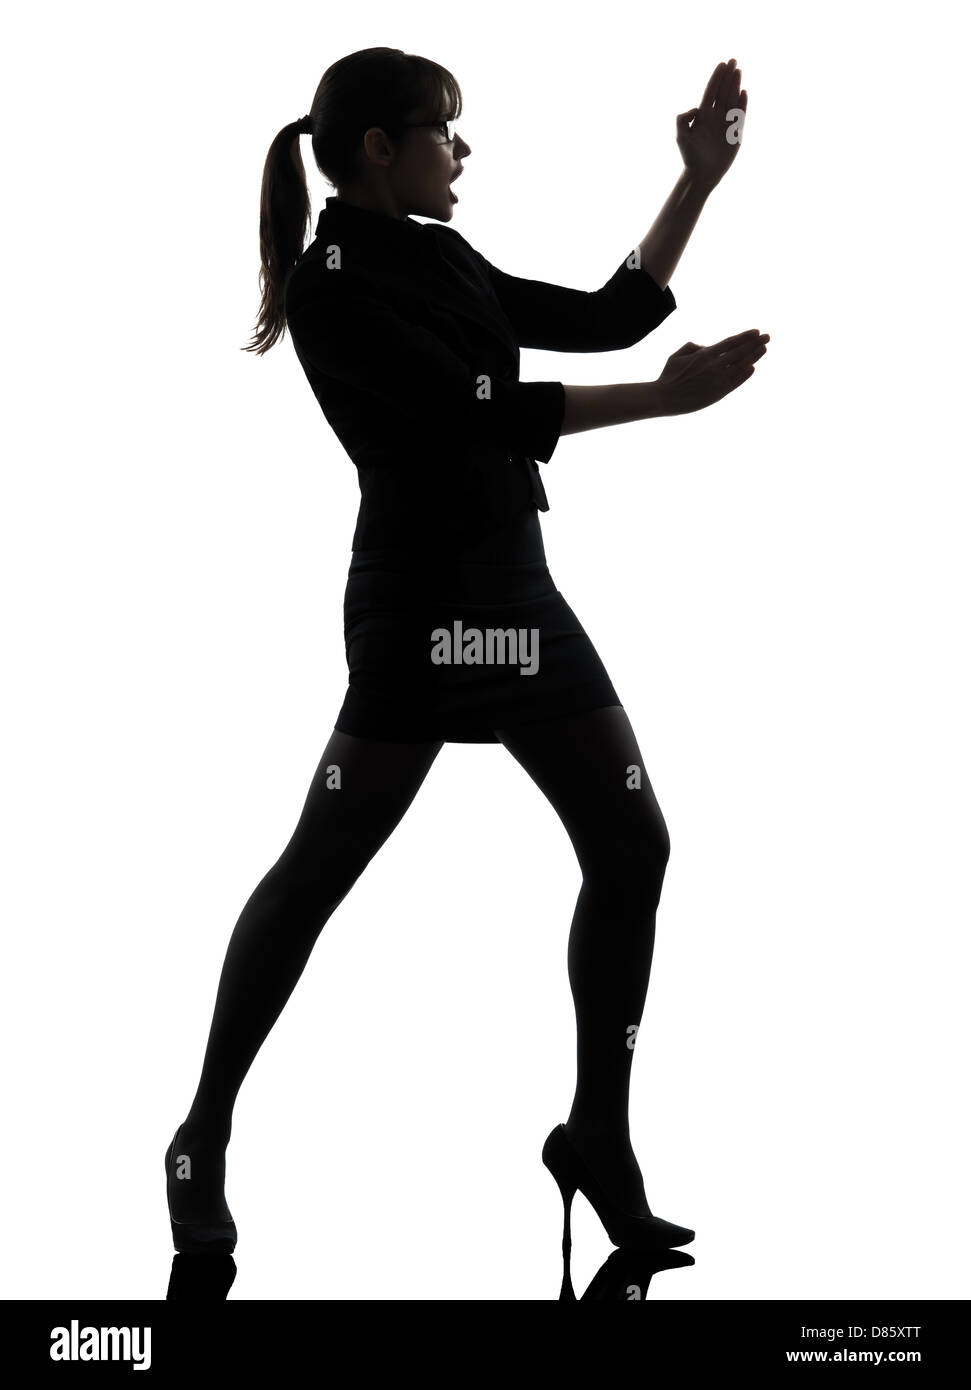 one business woman karate self defense silhouette studio isolated on white background Stock Photo